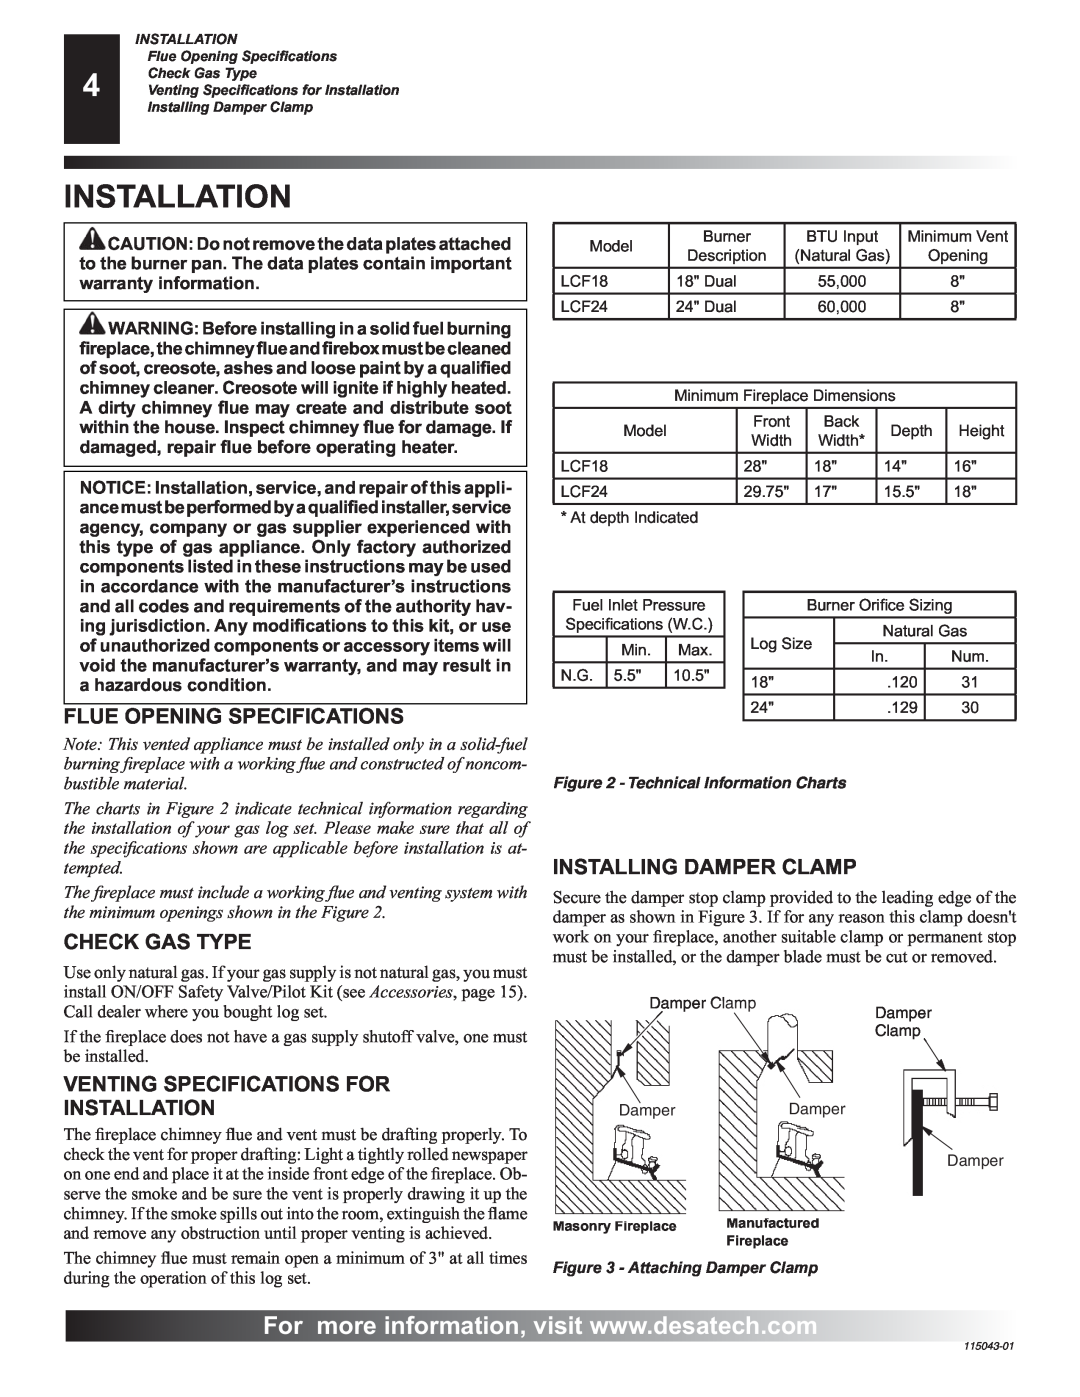 Desa RGA 2-72 installation manual Flue Opening Specifications, Check Gas Type, Venting Specifications For Installation 